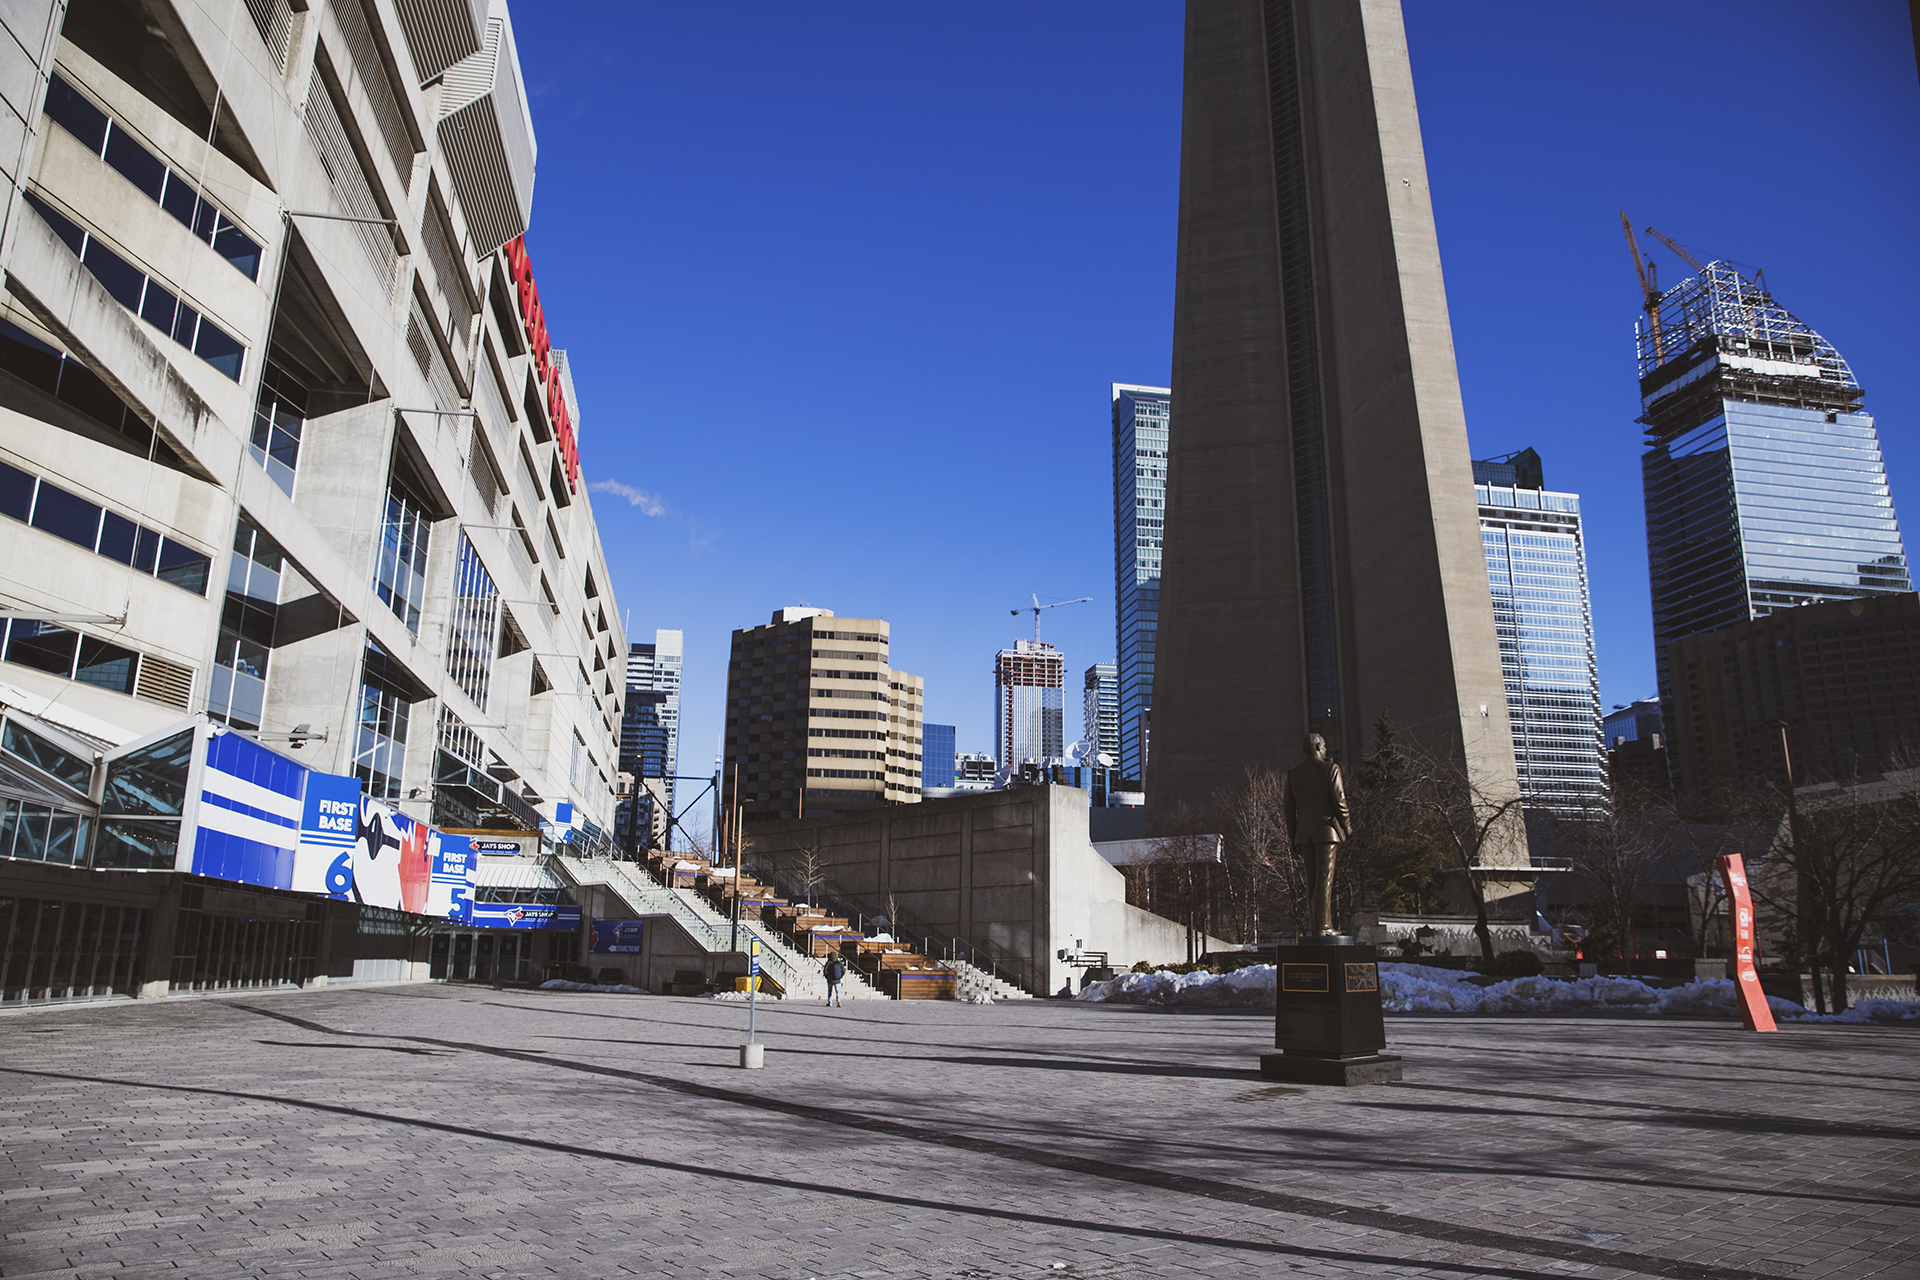 An empty sidewalk outside of the Rogers Centre. The Rogers Centre is on the left, with a bronze statue of a man on the right. The base of the CN tower can be seen behind the statue, as well as some buildings in the distance.